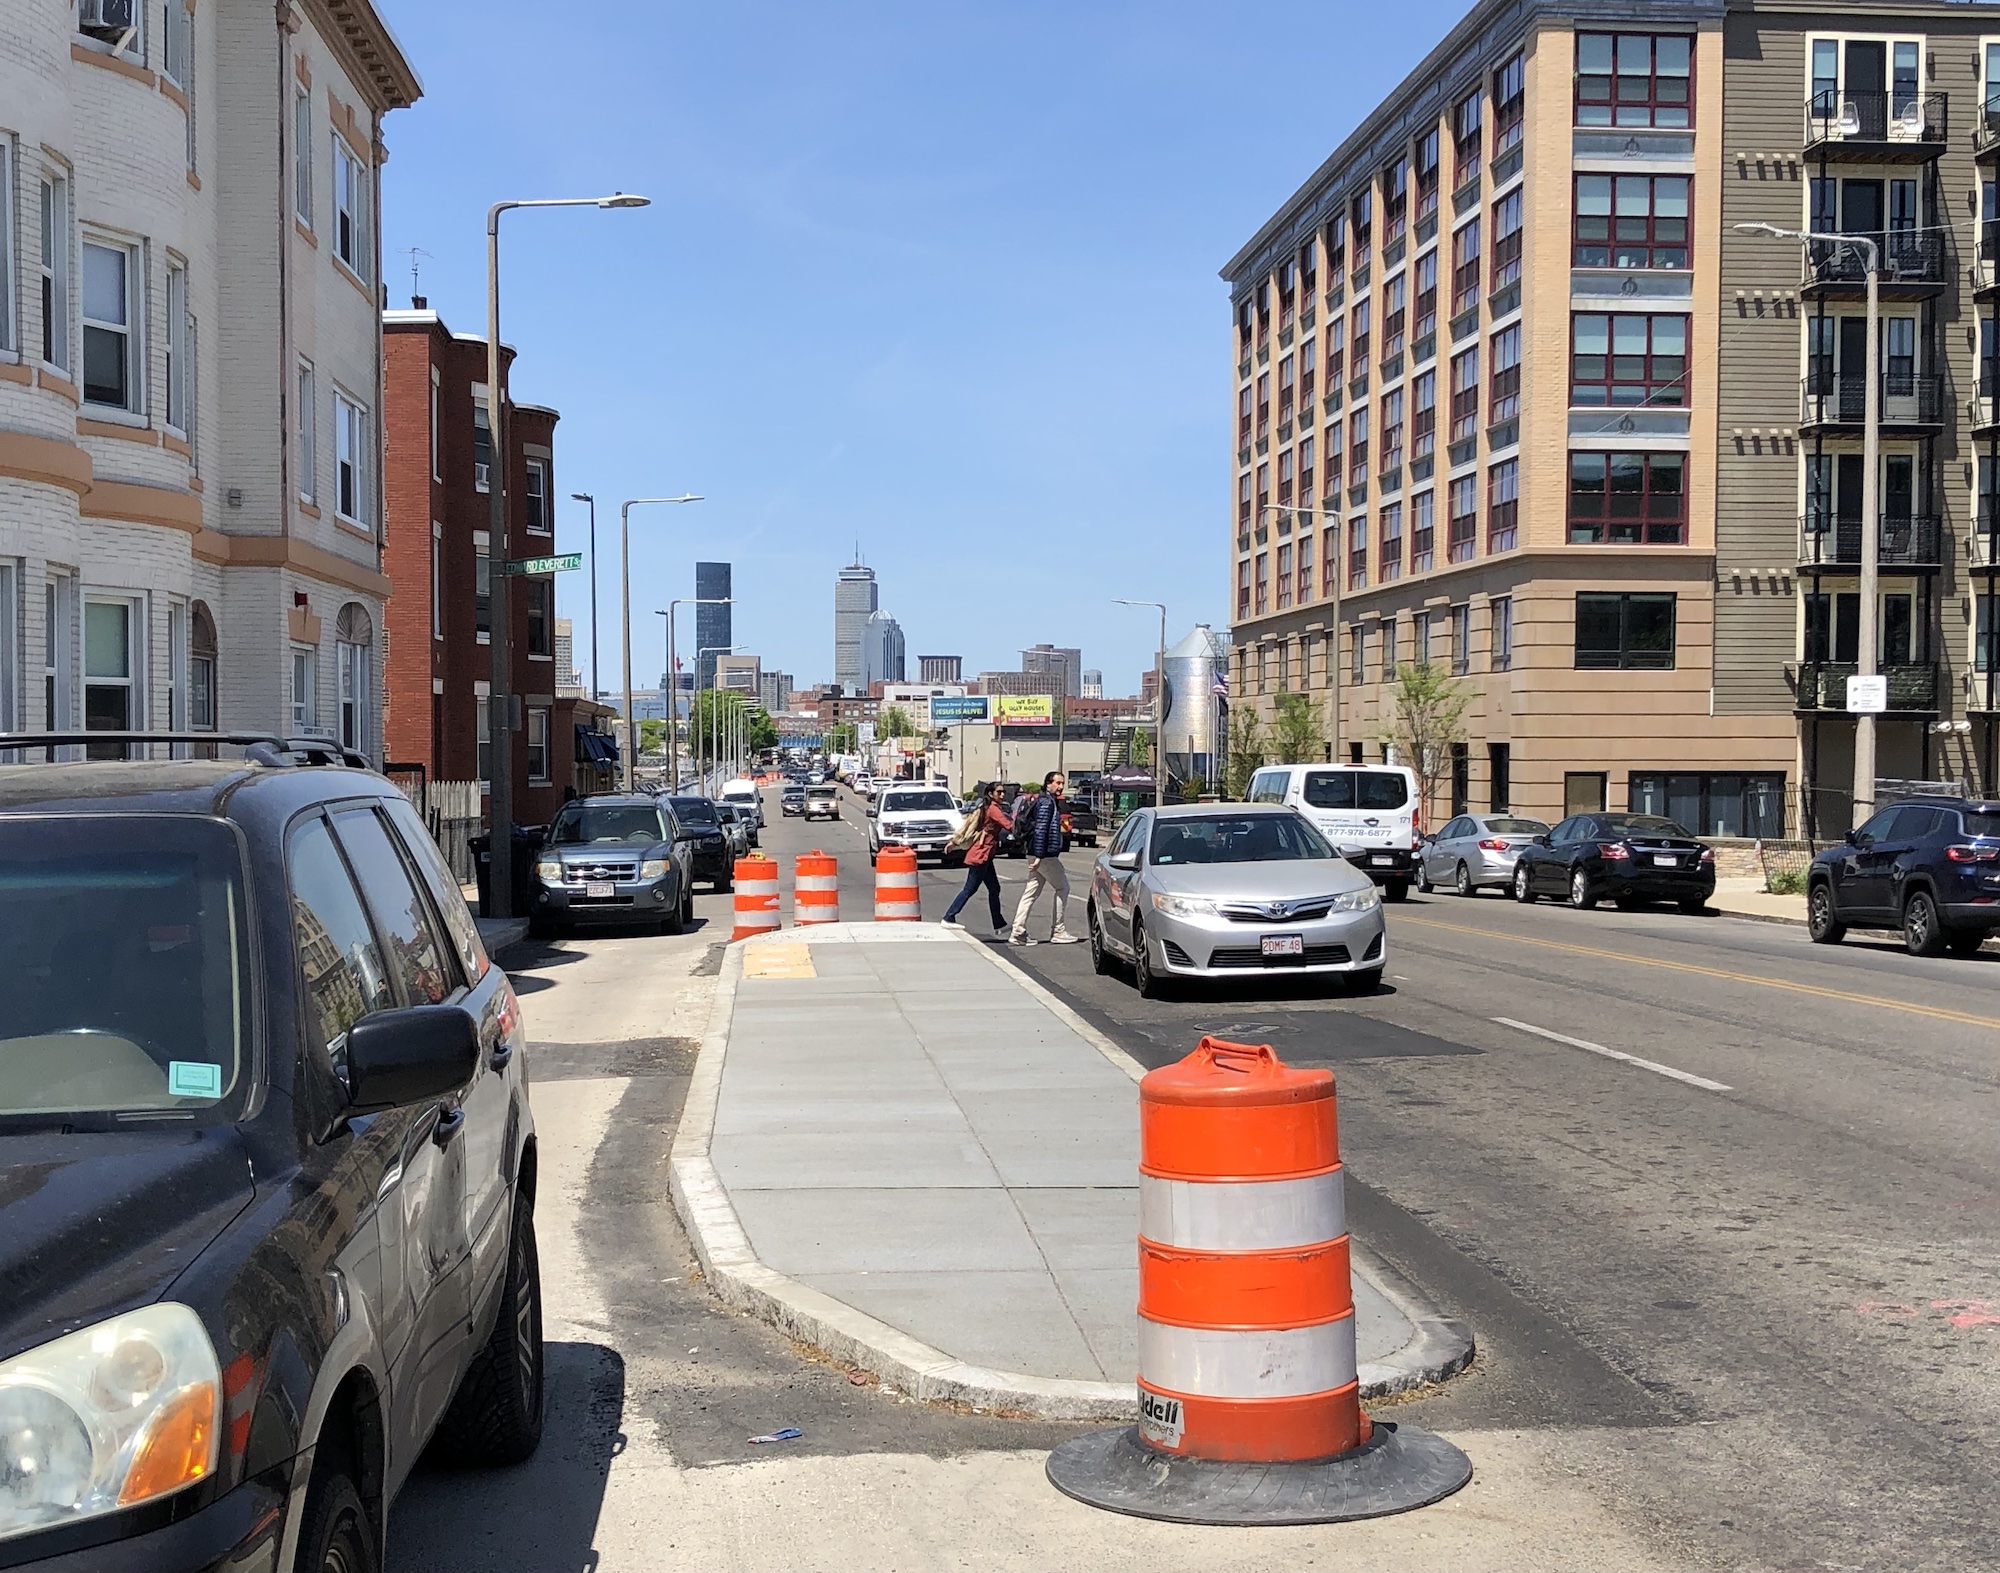 Orange construction barrels surround a newly-constructed median island surrounded by parked cars on the left and moving vehicles to the right. Two pedestrians are stepping off the island to cross the street, which is lined with multi-story apartment buildings. In the distance on the horizon are visible the Prudential Center and other skyscrapers in Back Bay.